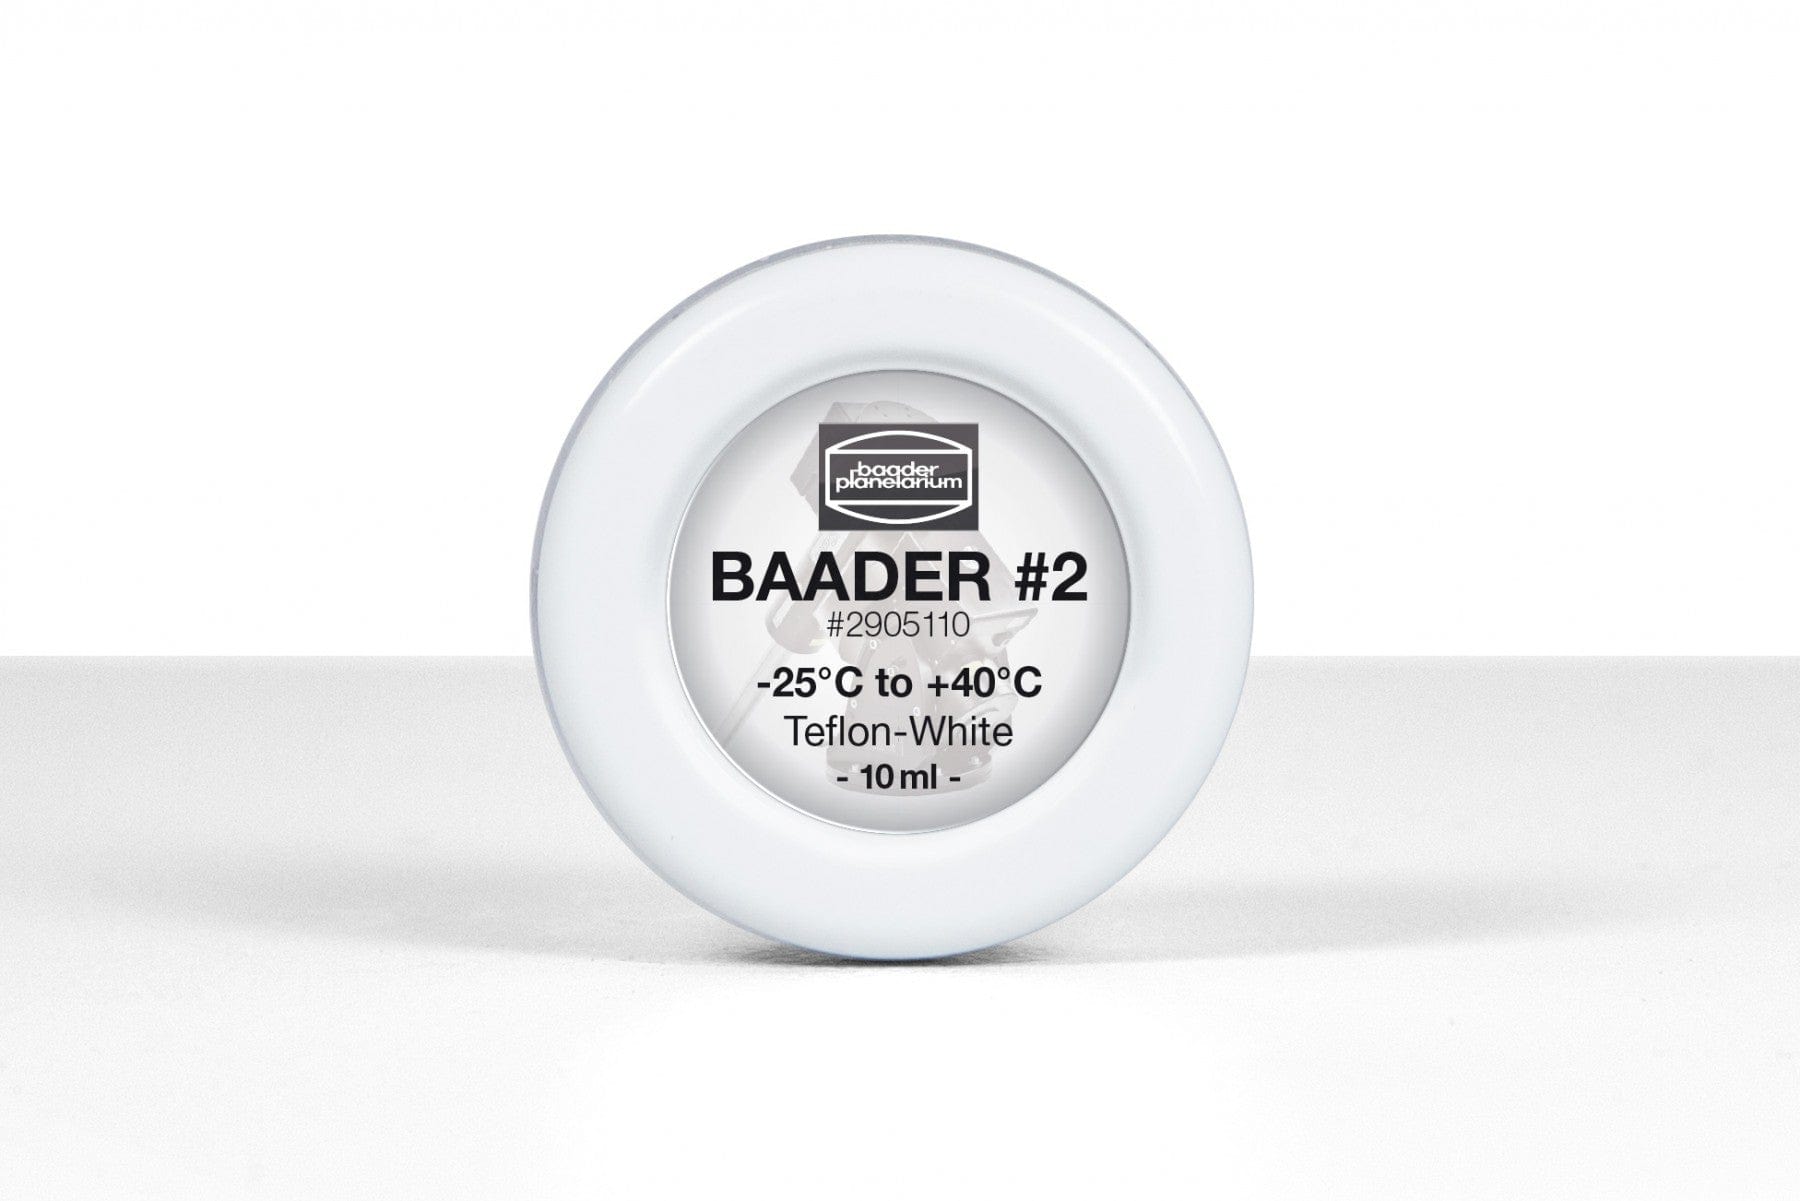 Baader Planetarium Accessory Baader Machine-Grease #2 Teflon-White, from -25°C up to +40°C - 2905110